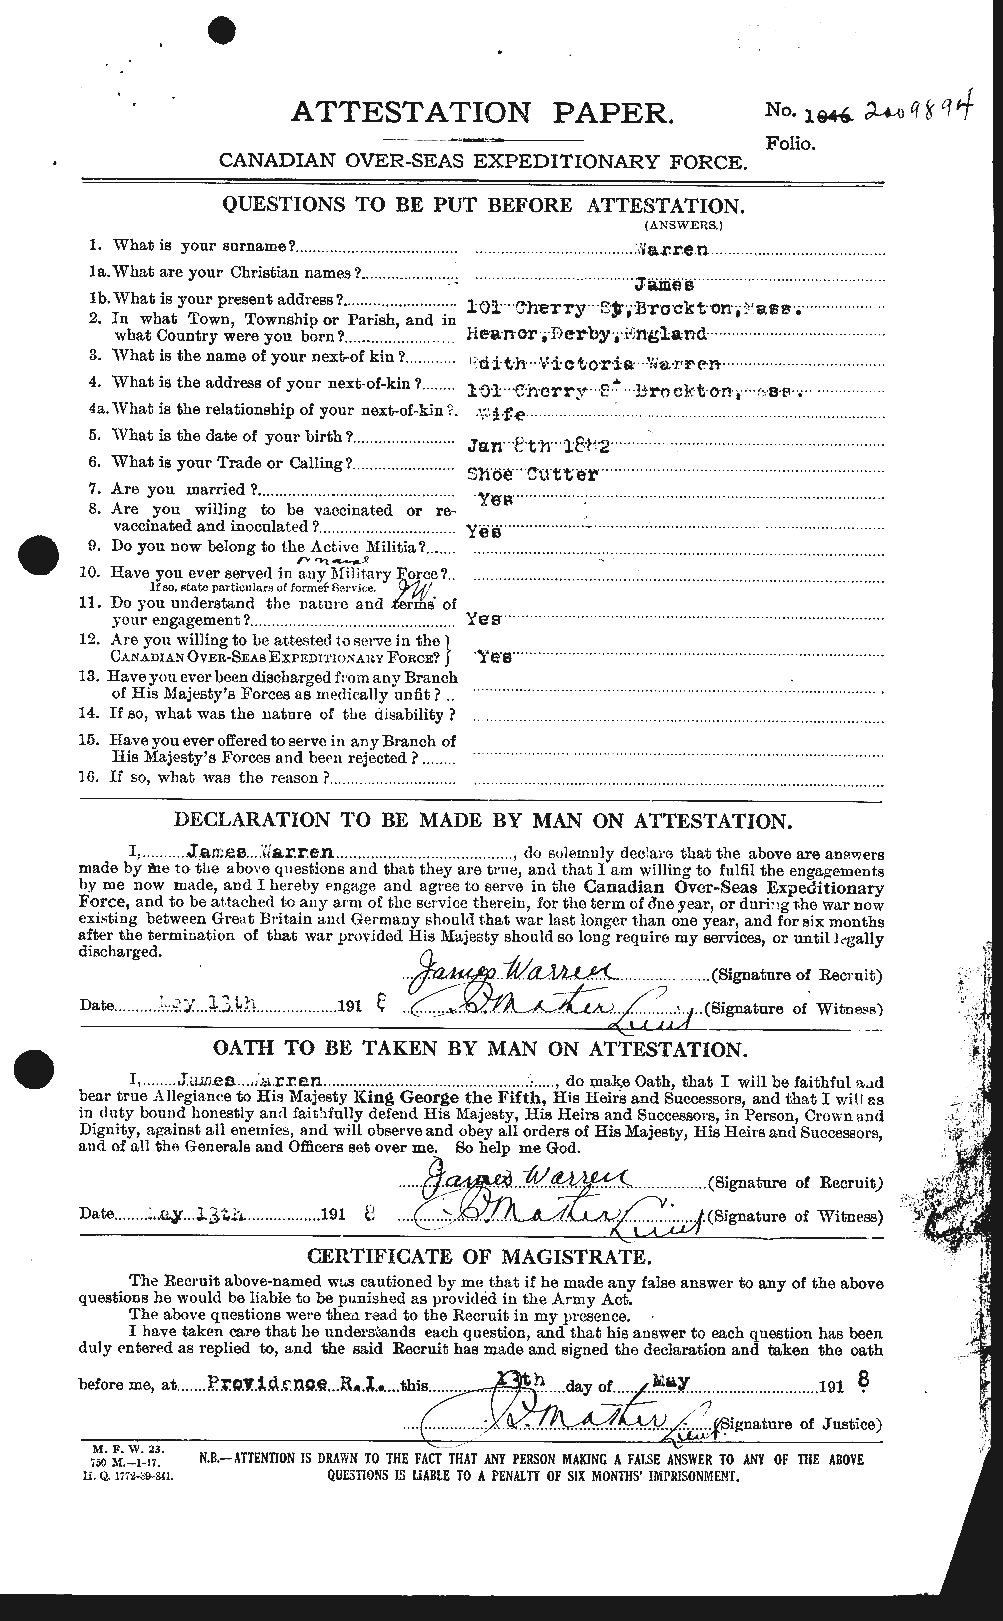 Personnel Records of the First World War - CEF 658517a